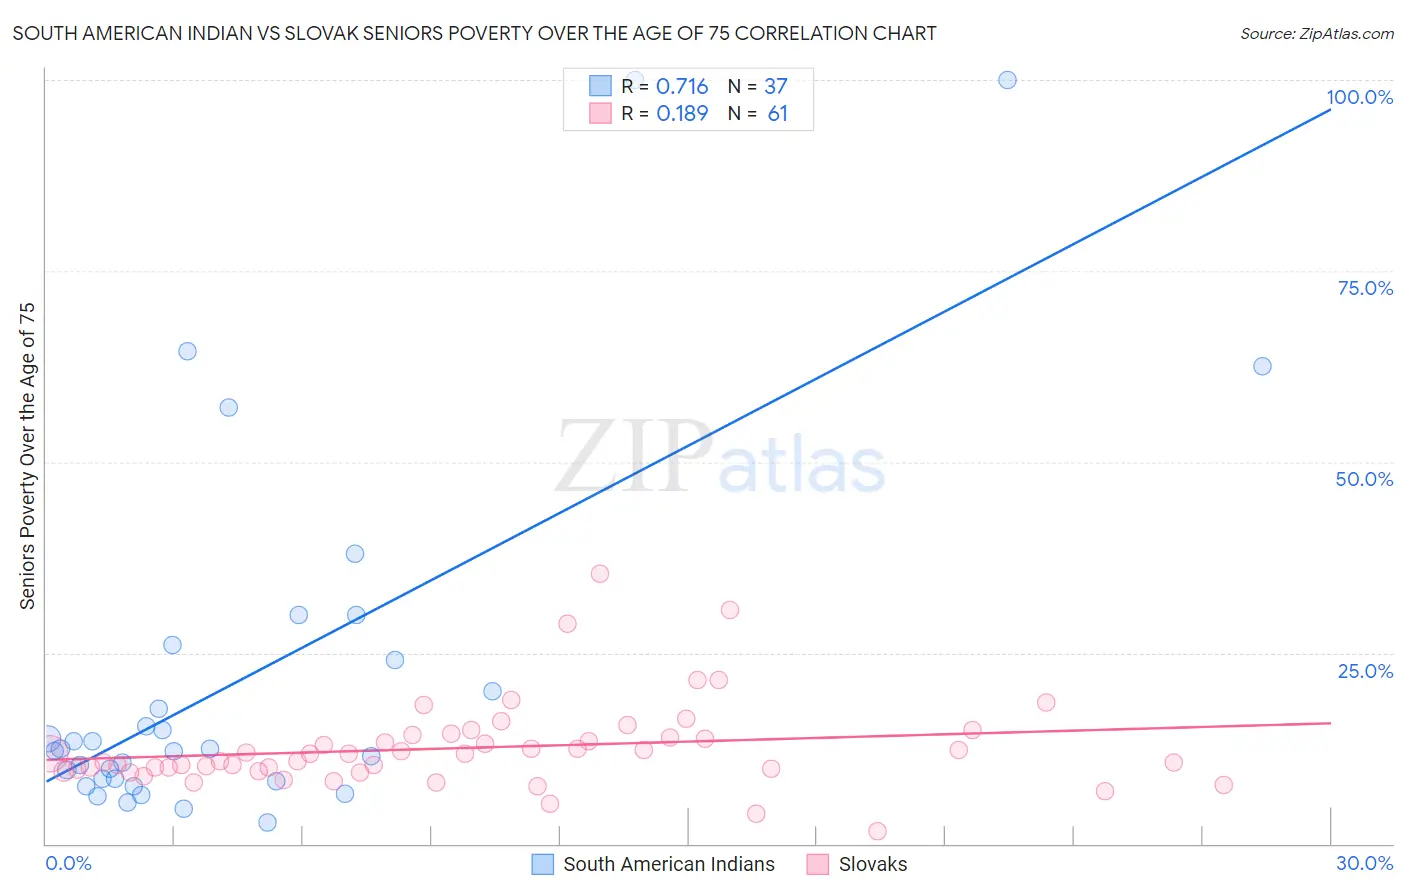 South American Indian vs Slovak Seniors Poverty Over the Age of 75